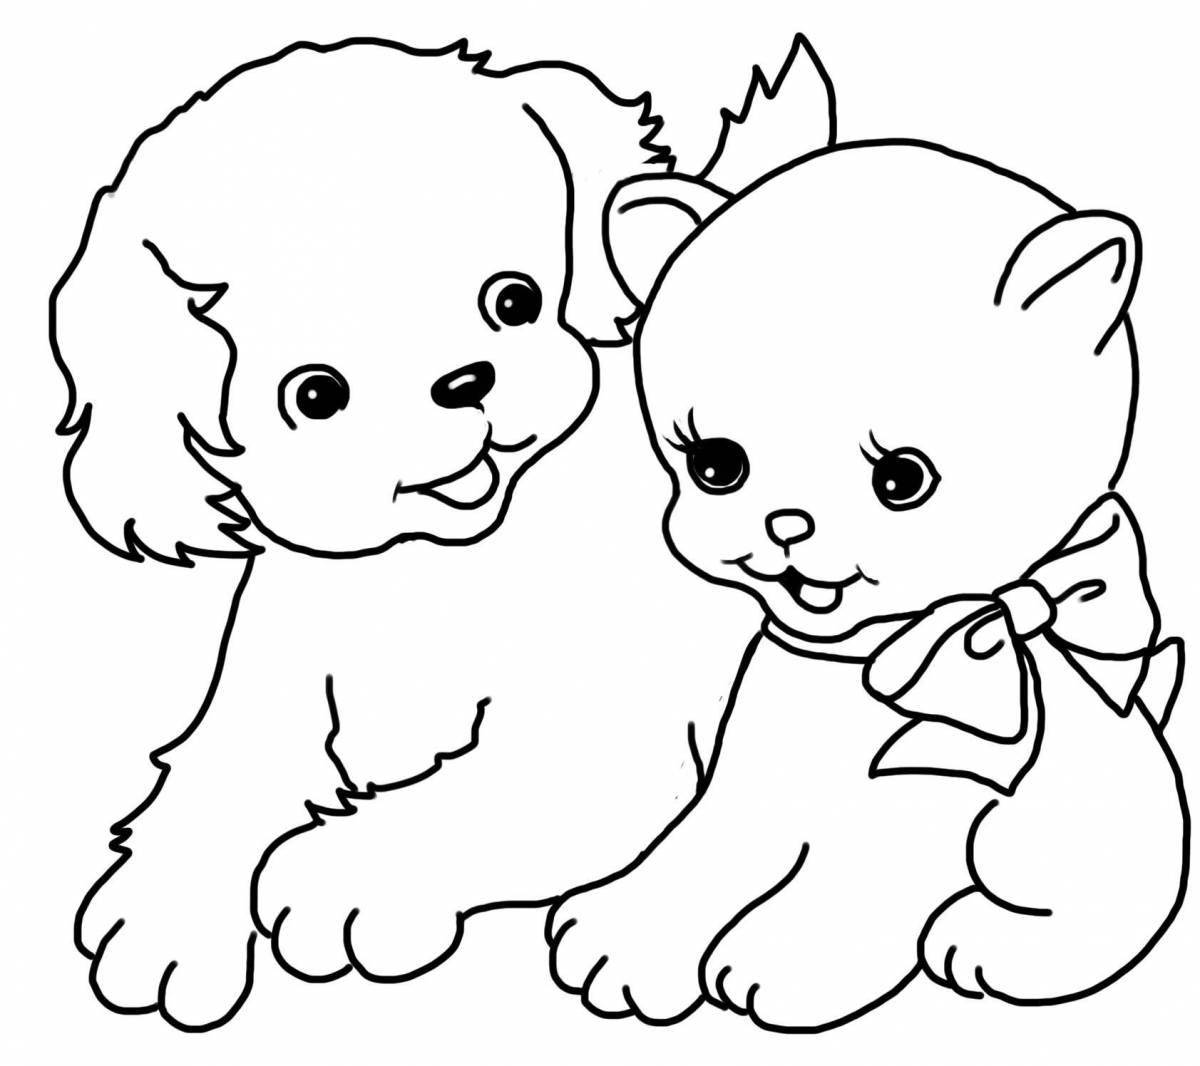 Dan kitty and dogs funny coloring book